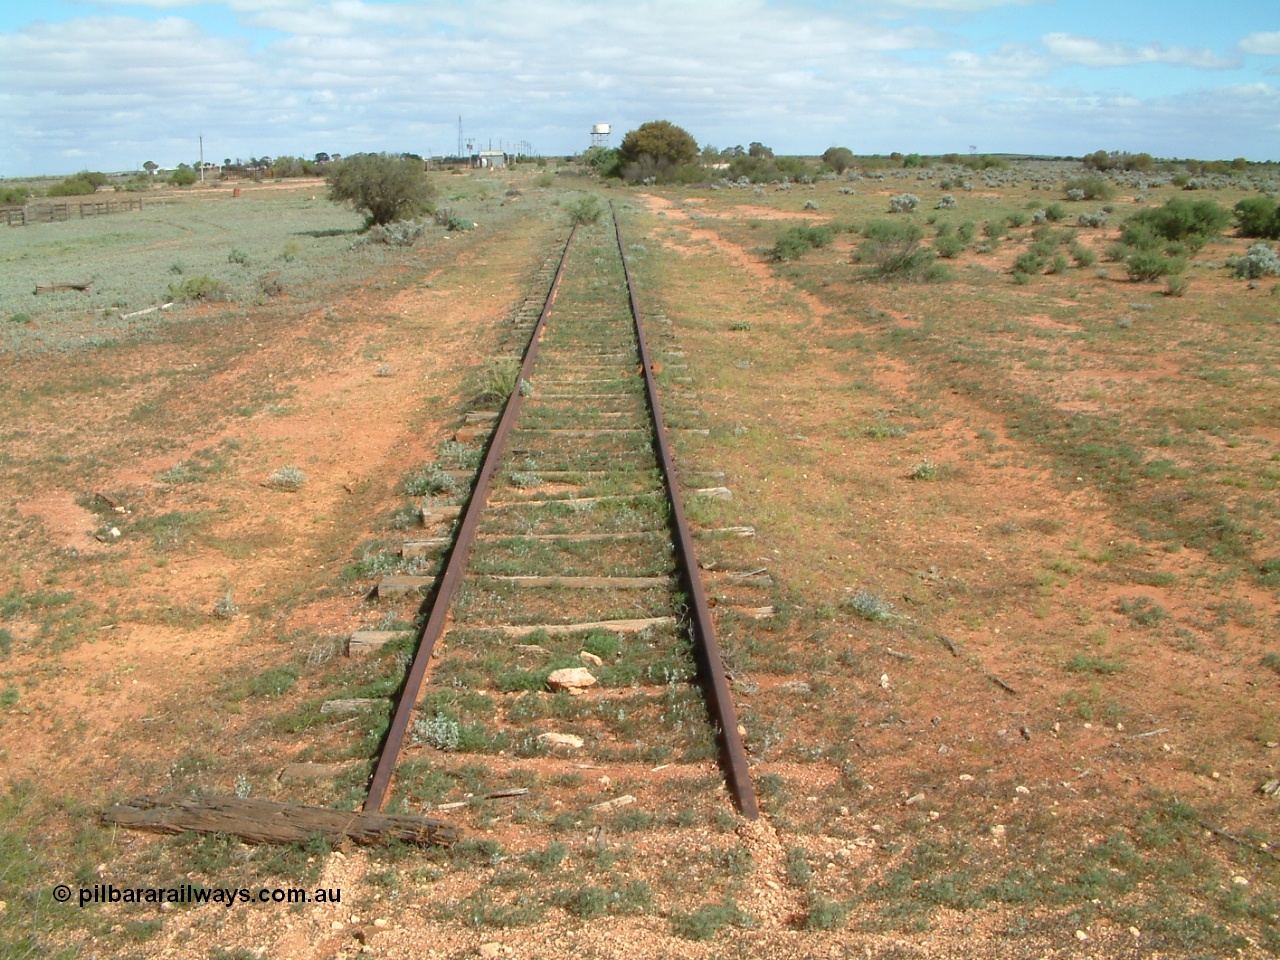 030415 141719
Kingoonya, located at the 426.5 km on the Trans Australian Railway, looking south from the end of the sidings with cattle yards, power station and tank stand all in the distance. [url=https://goo.gl/maps/HTgqfxK99c62MYJY9]GeoData location[/url].
